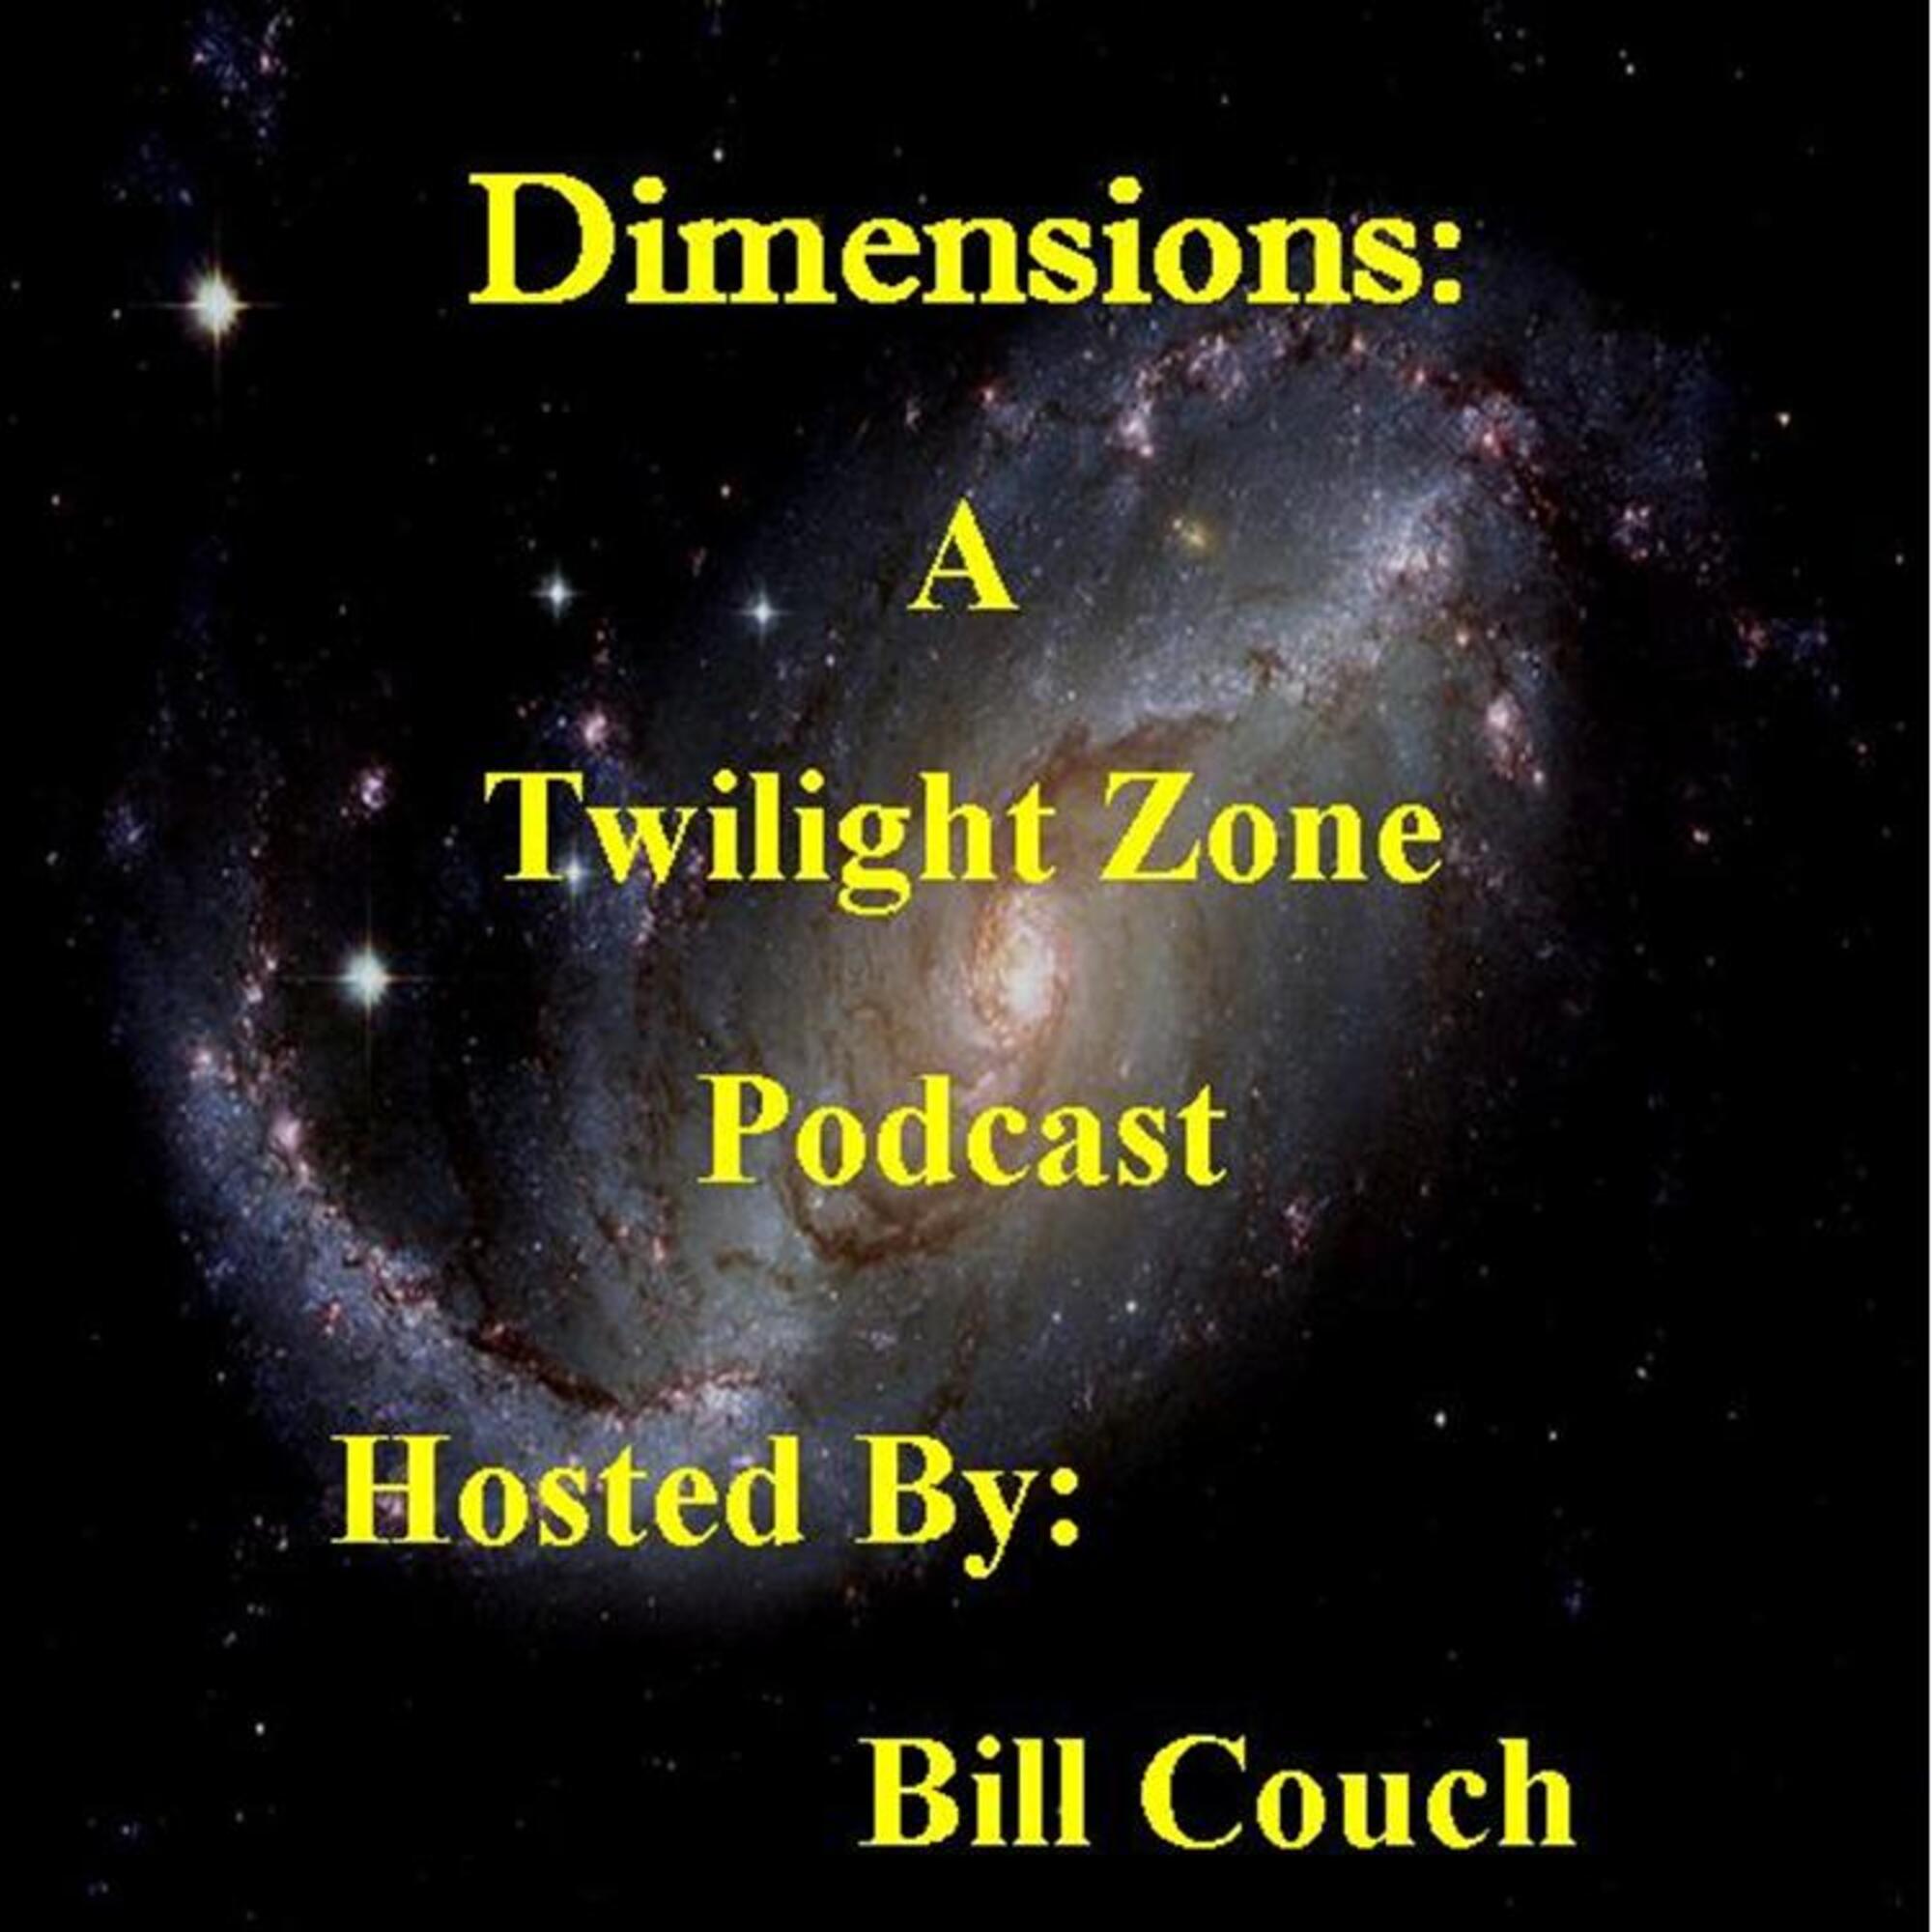 Dimensions: A Twilight Zone Podcast Episode 8 "Time Enough At Last"